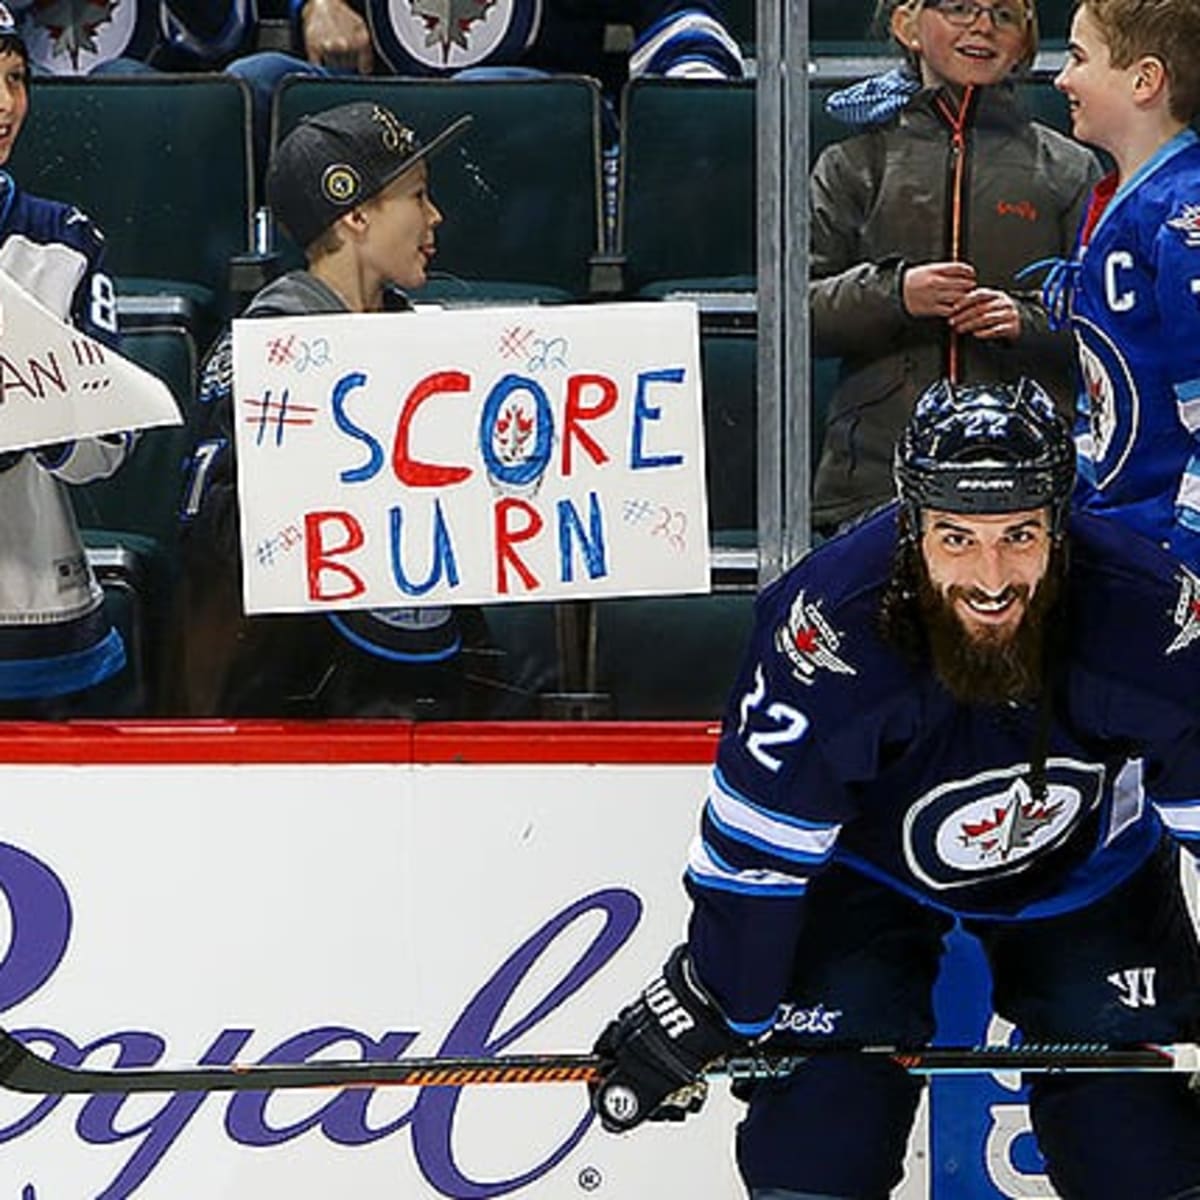 St. Louis Blues right wing Chris Thorburn is shown in the green News  Photo - Getty Images